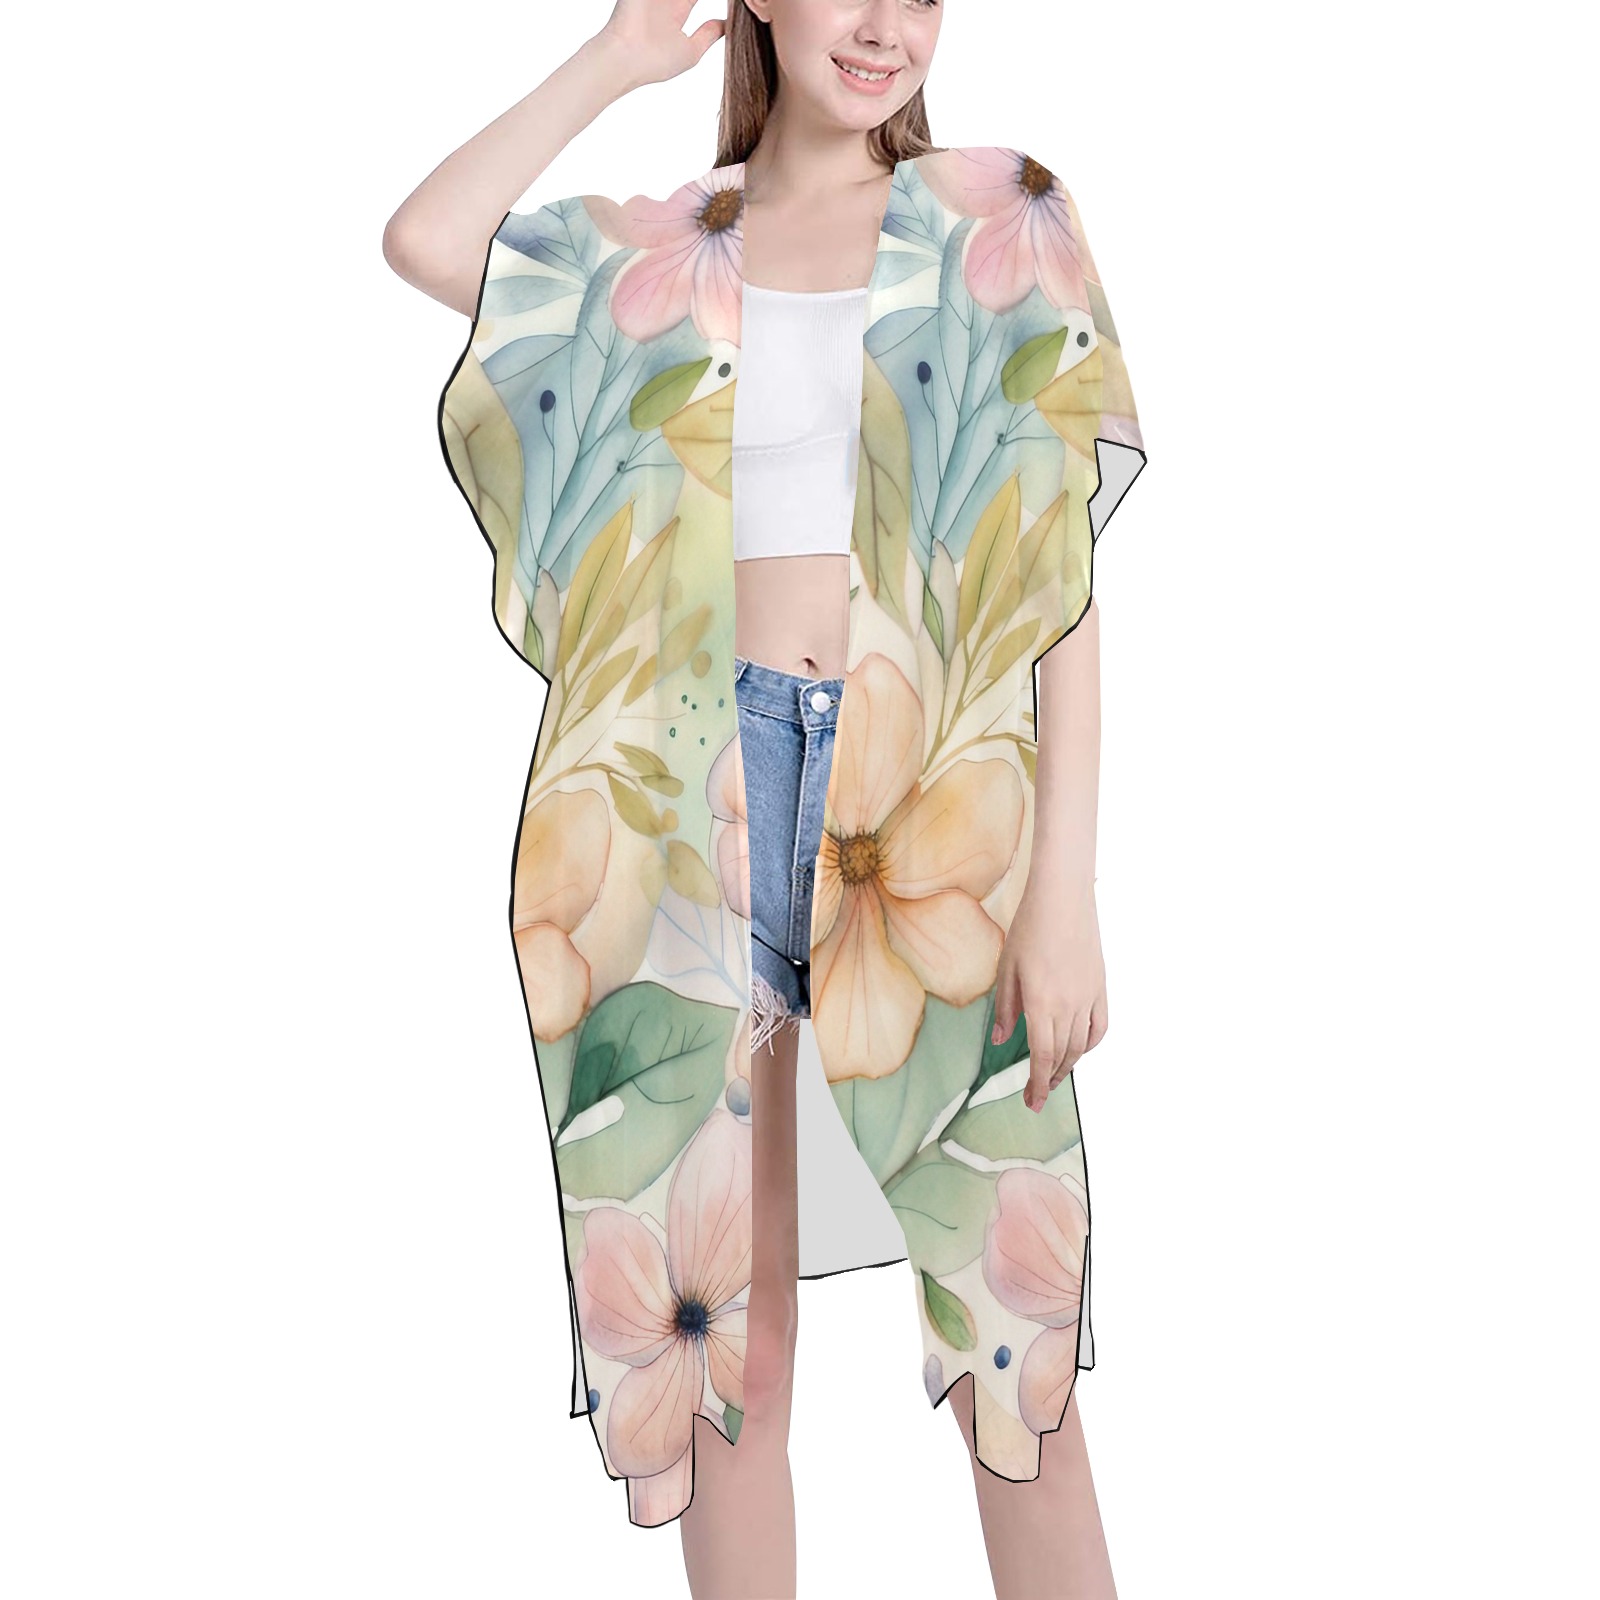 Watercolor Floral 1 Mid-Length Side Slits Chiffon Cover Ups (Model H50)